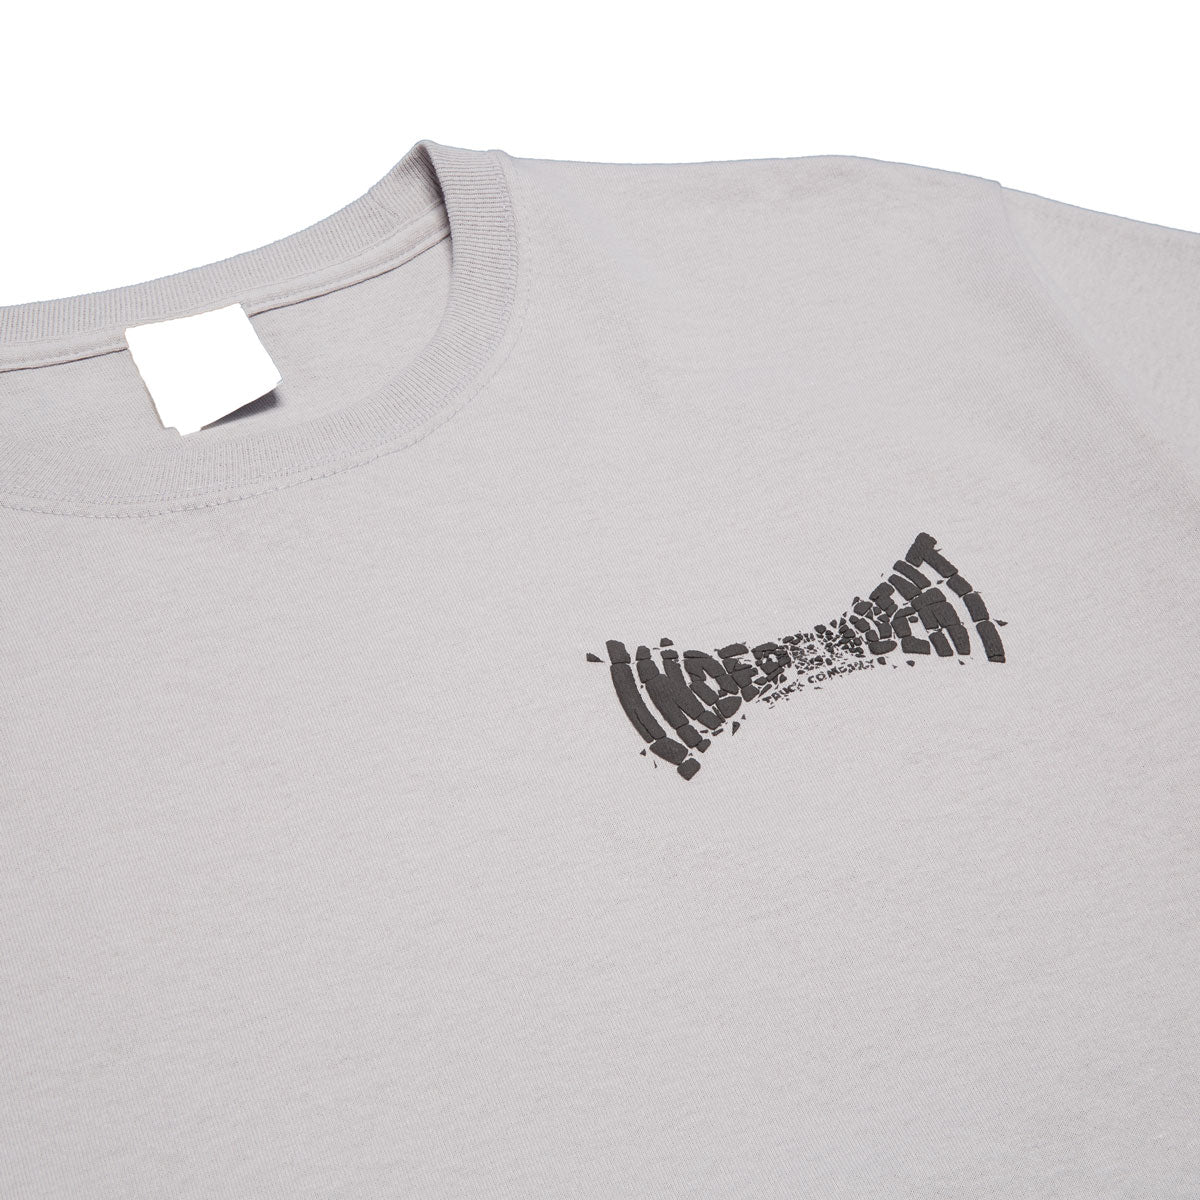 Independent Shatter Span T-Shirt - Silver image 3